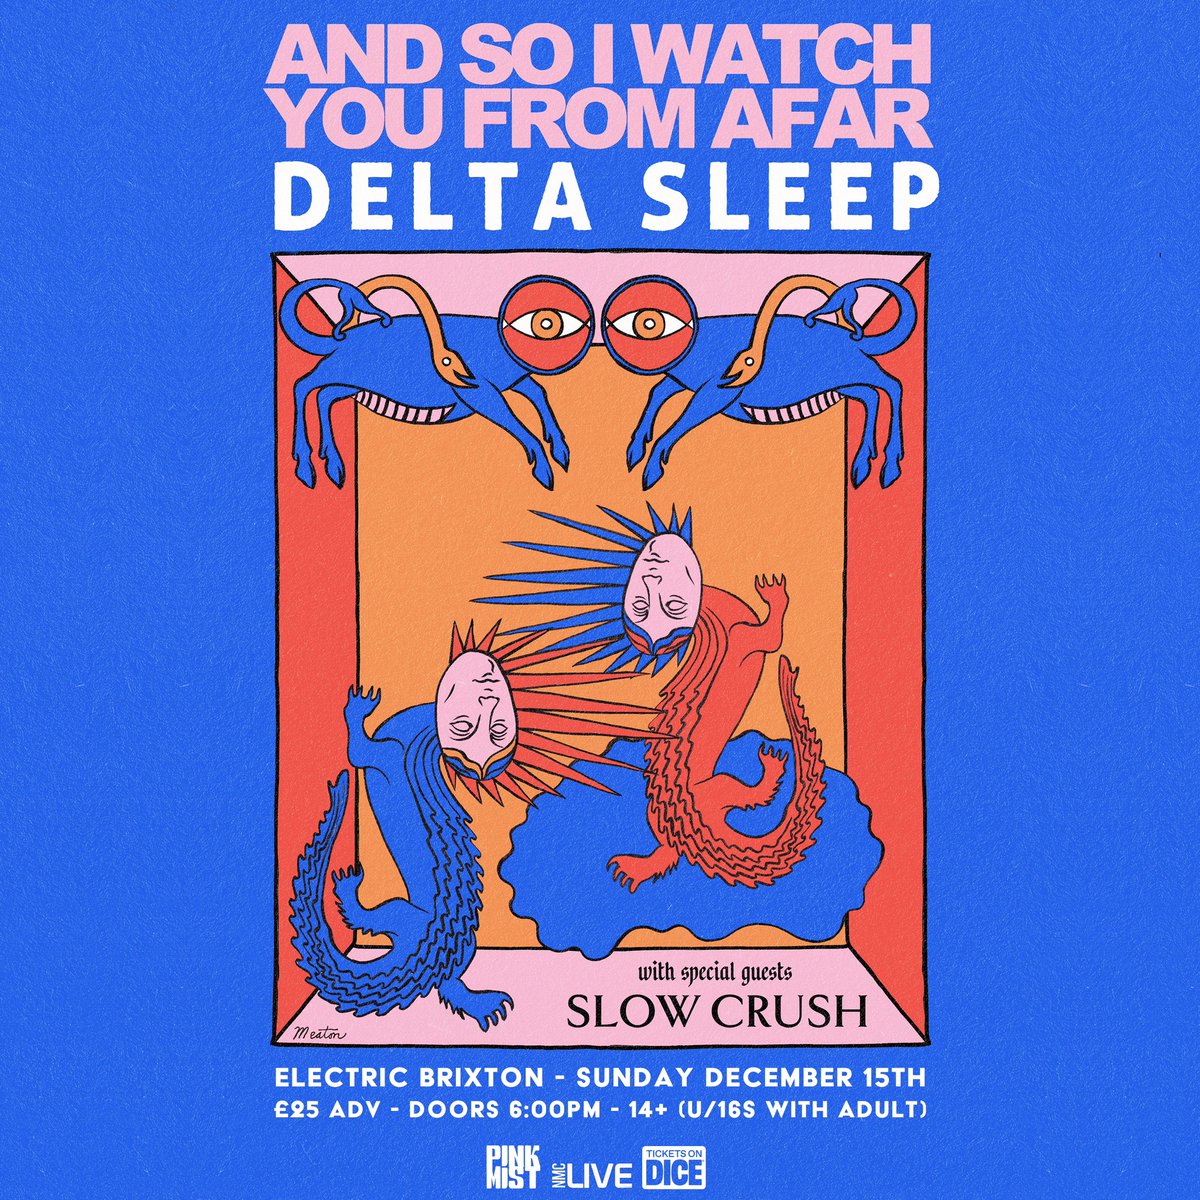 📢 NEW SHOW! @ASIWYFA_BAND, @deltasleep and @slowcrushband play the palatial (at least by the standards of where math rock bands get to play) environs of @electricbrixton this December. 🎫 Tickets go on sale tomorrow, 9th May at 10am at link.dice.fm/R2dbdc70